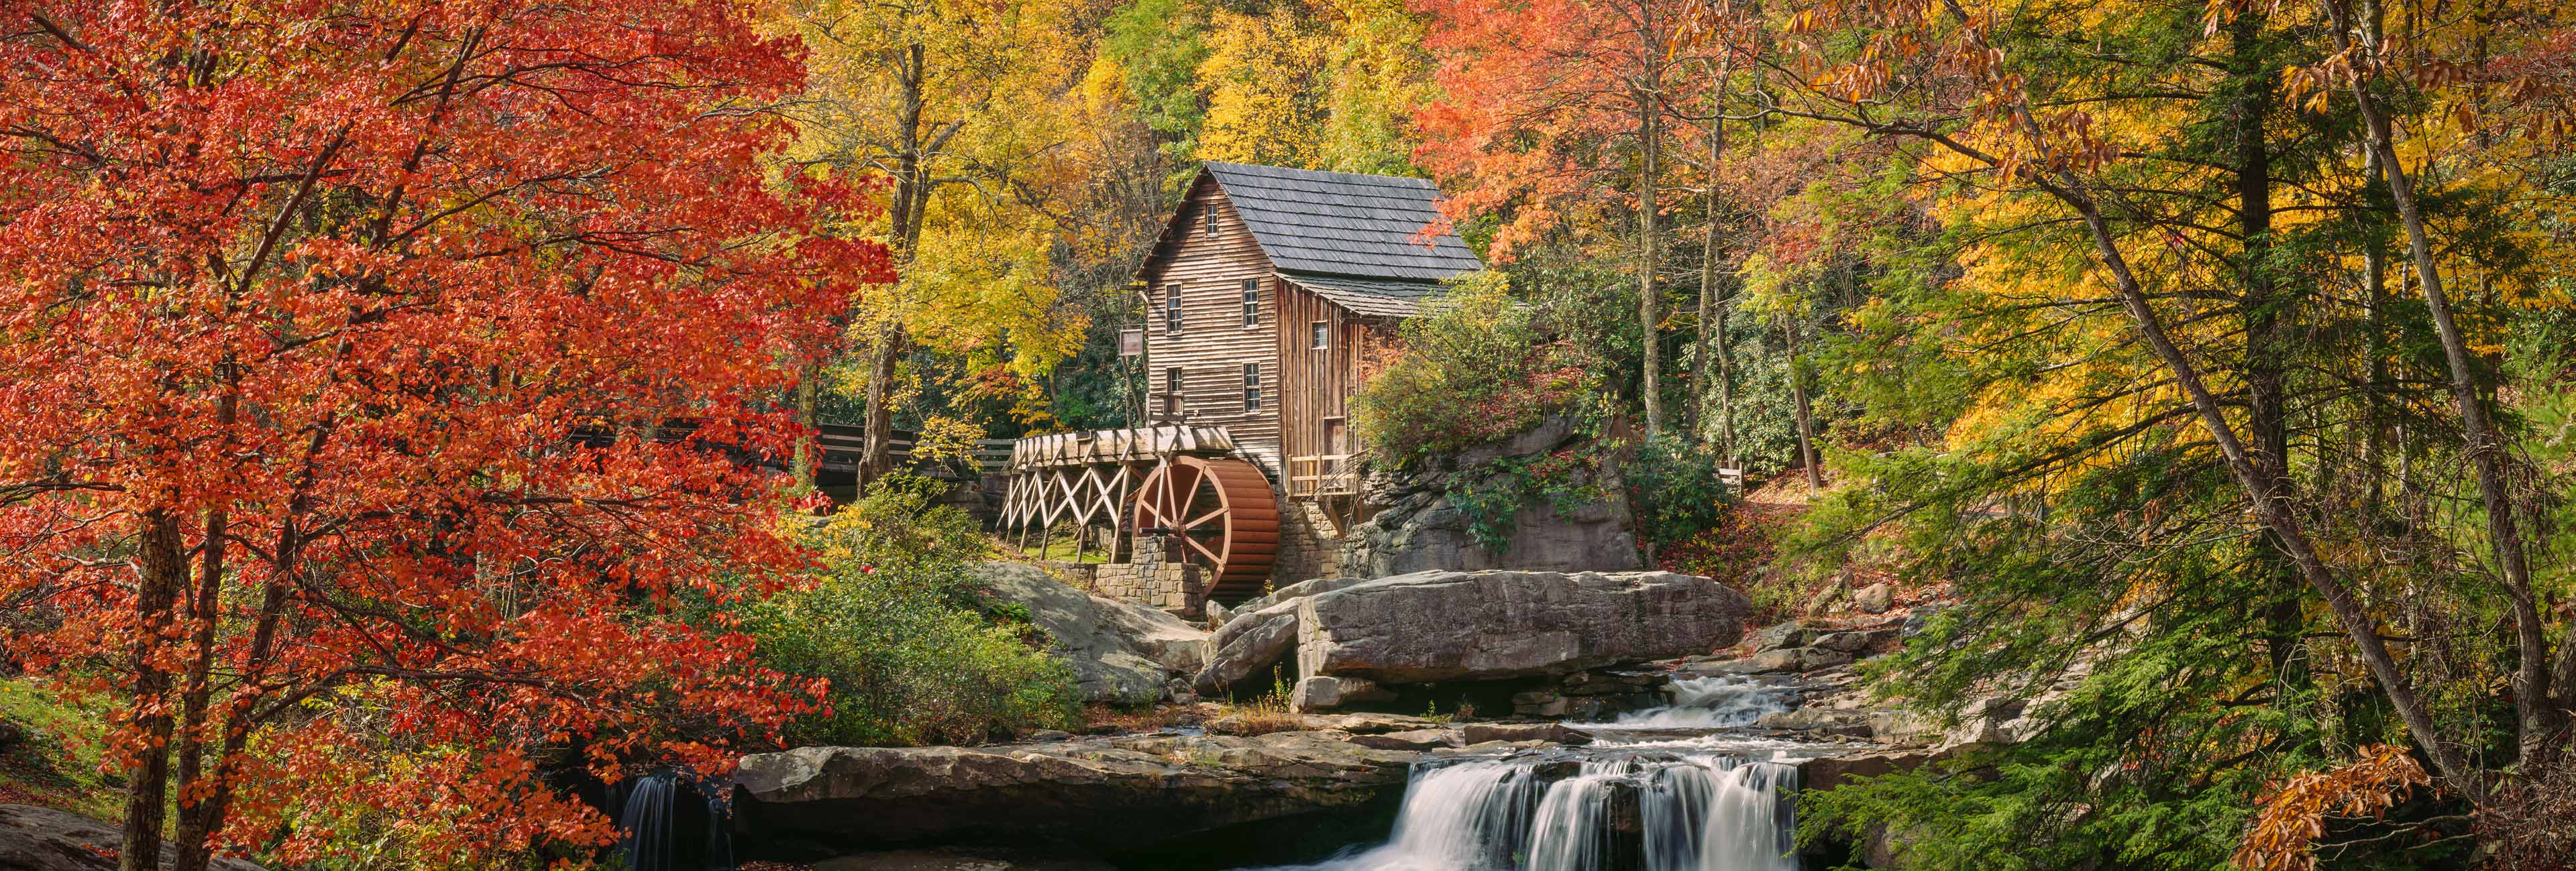 Glade Creek Grist Mill, Babcock State Park,  West Virginia, USA